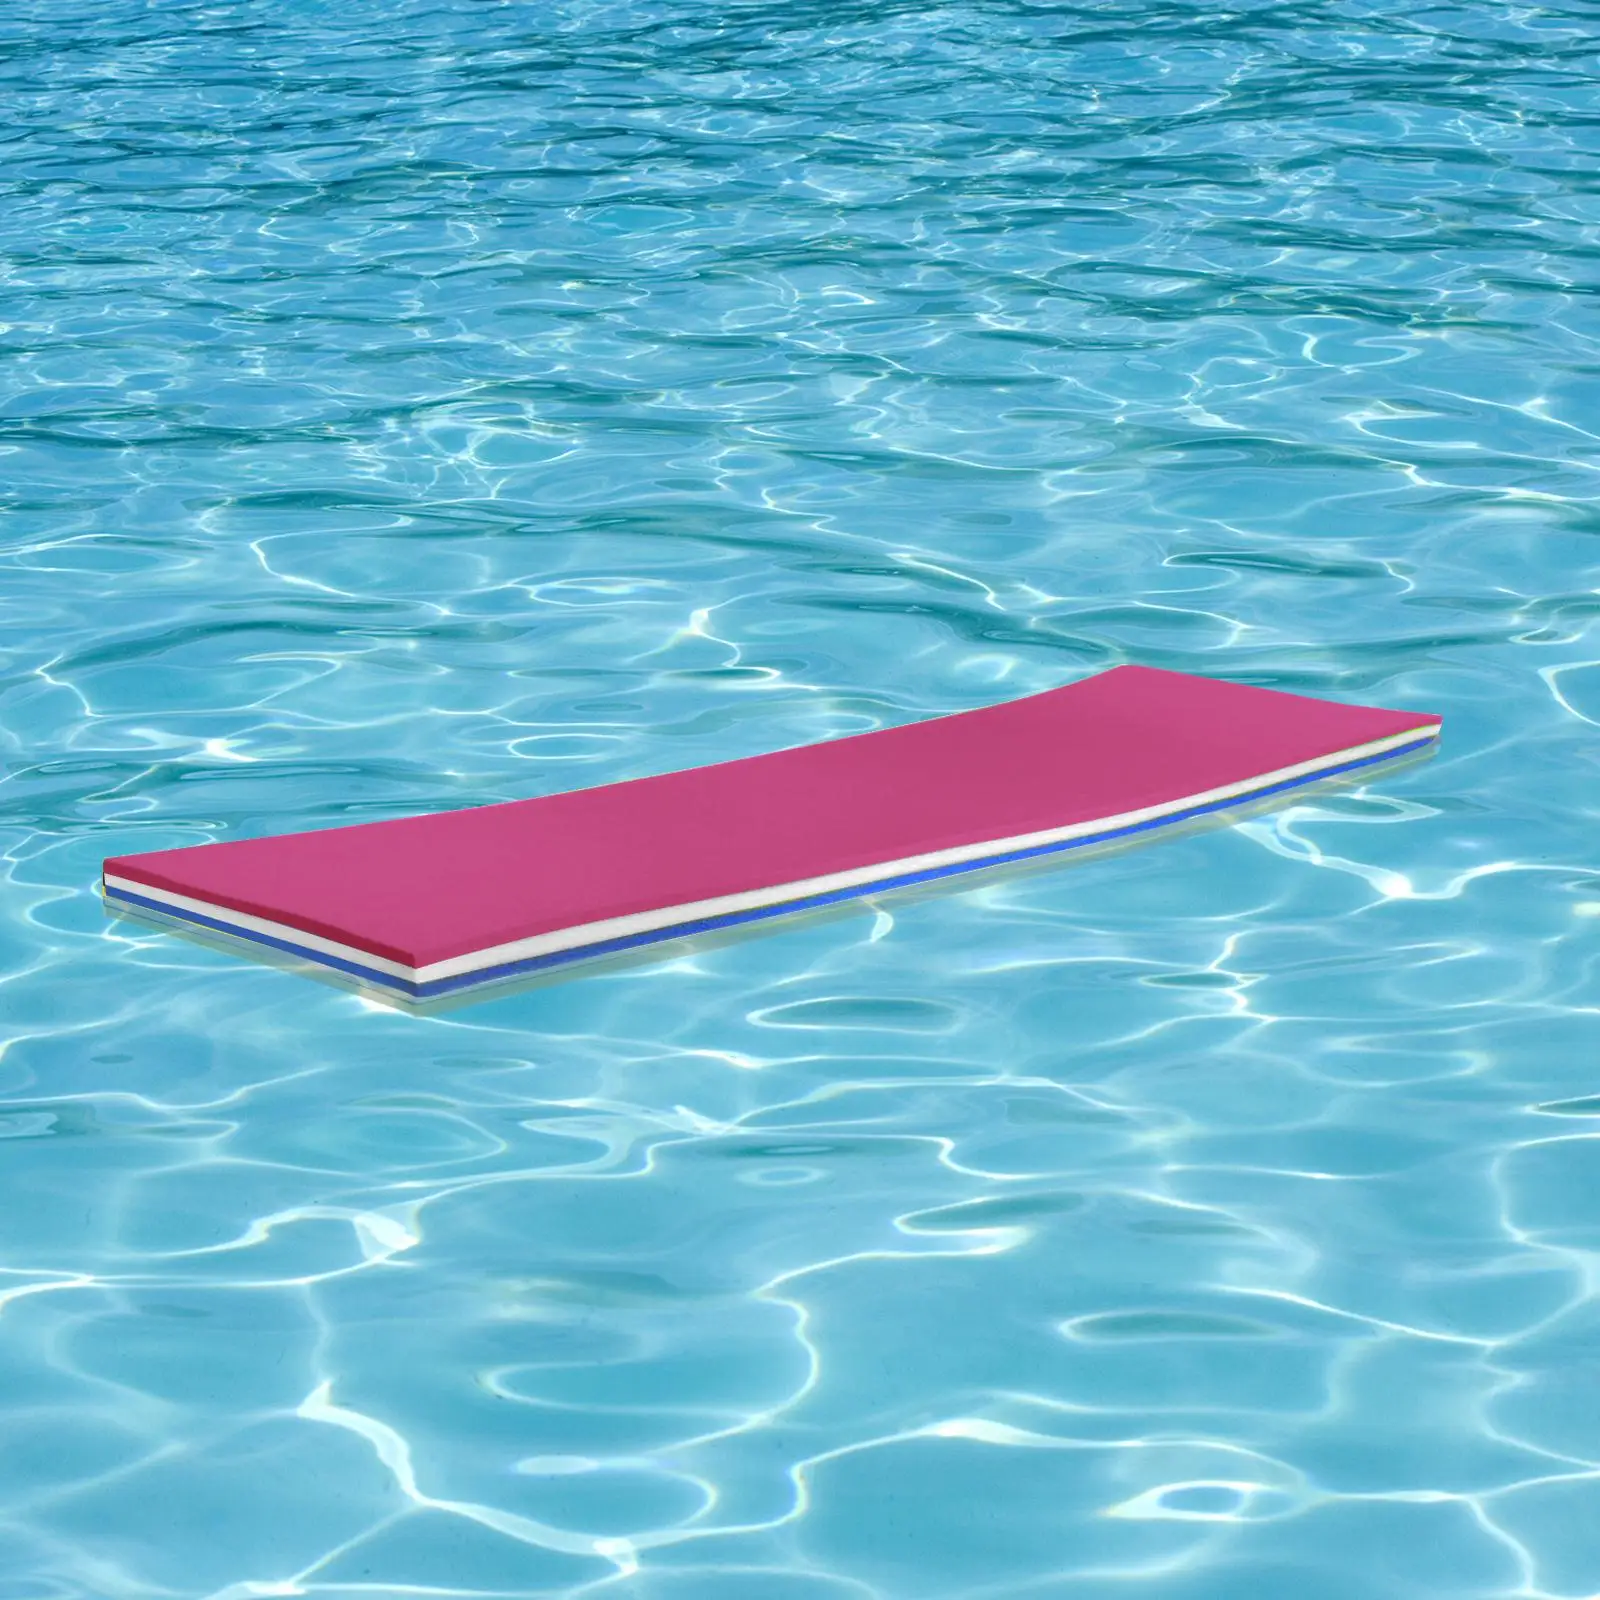 Pool Floating Water Mat 3 Layer Water Raft 43x15.7x1.3Inches for Playing, Relaxing, Recreation Roll up Pad Pink White Blue